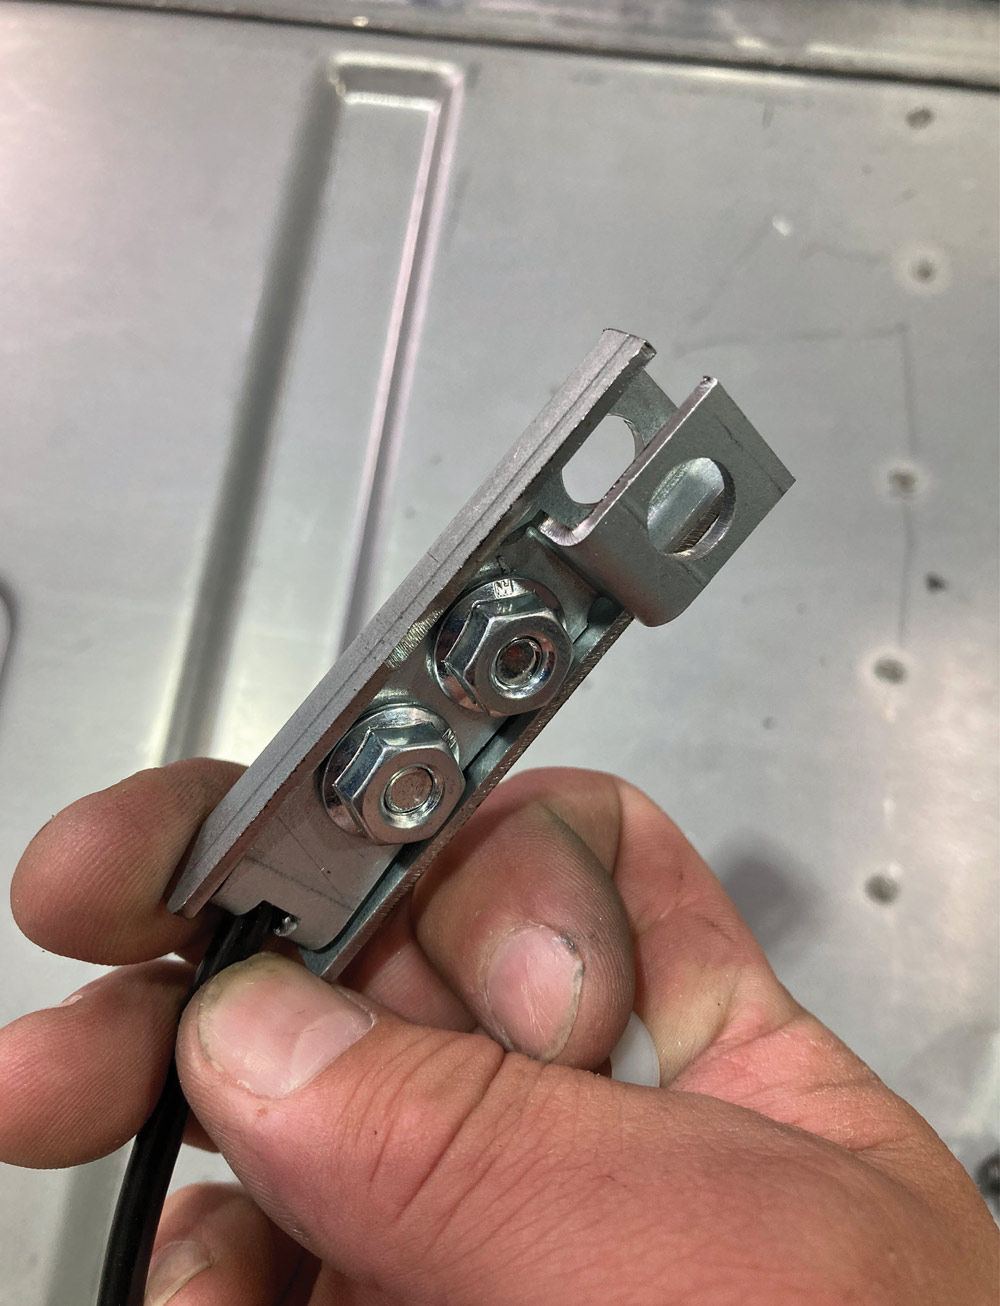 support cable being inserted into bracket